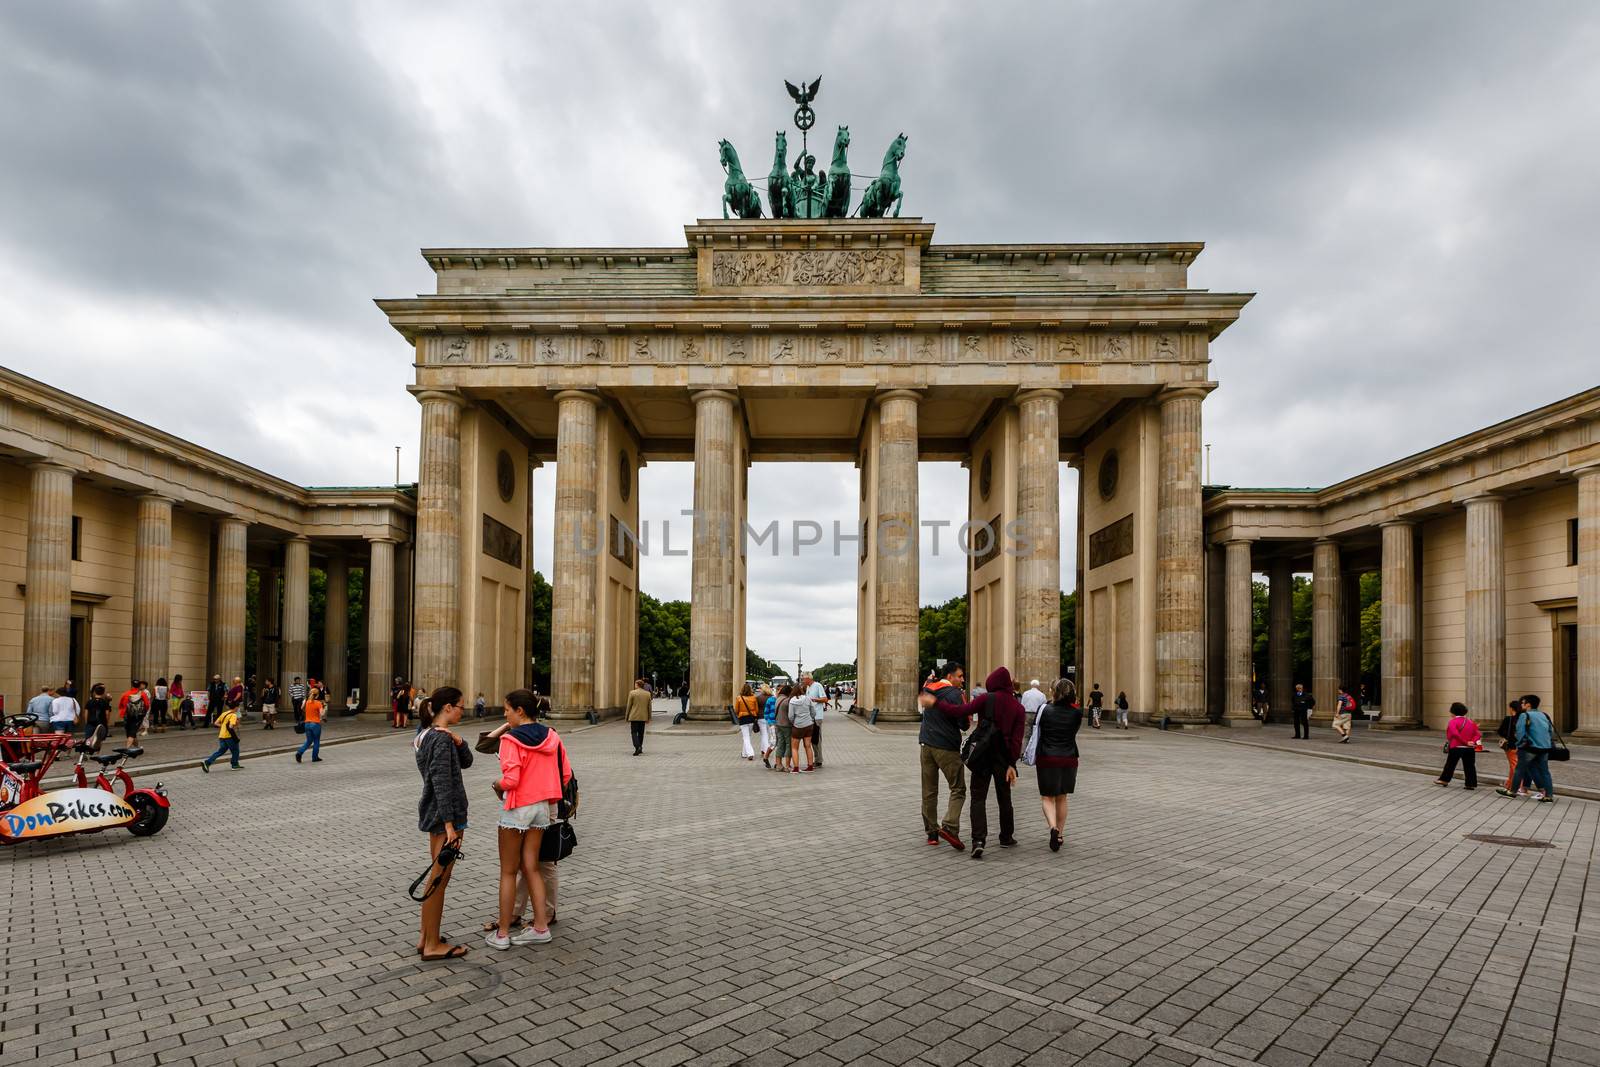 BERLIN, GERMANY - AUGUST 11: The Brandenburger Tor (Brandenburg Gate) is the ancient gateway to Berlin on August 11, 2013. It was rebuilt in the late 18th century as a neoclassical triumphal arch.